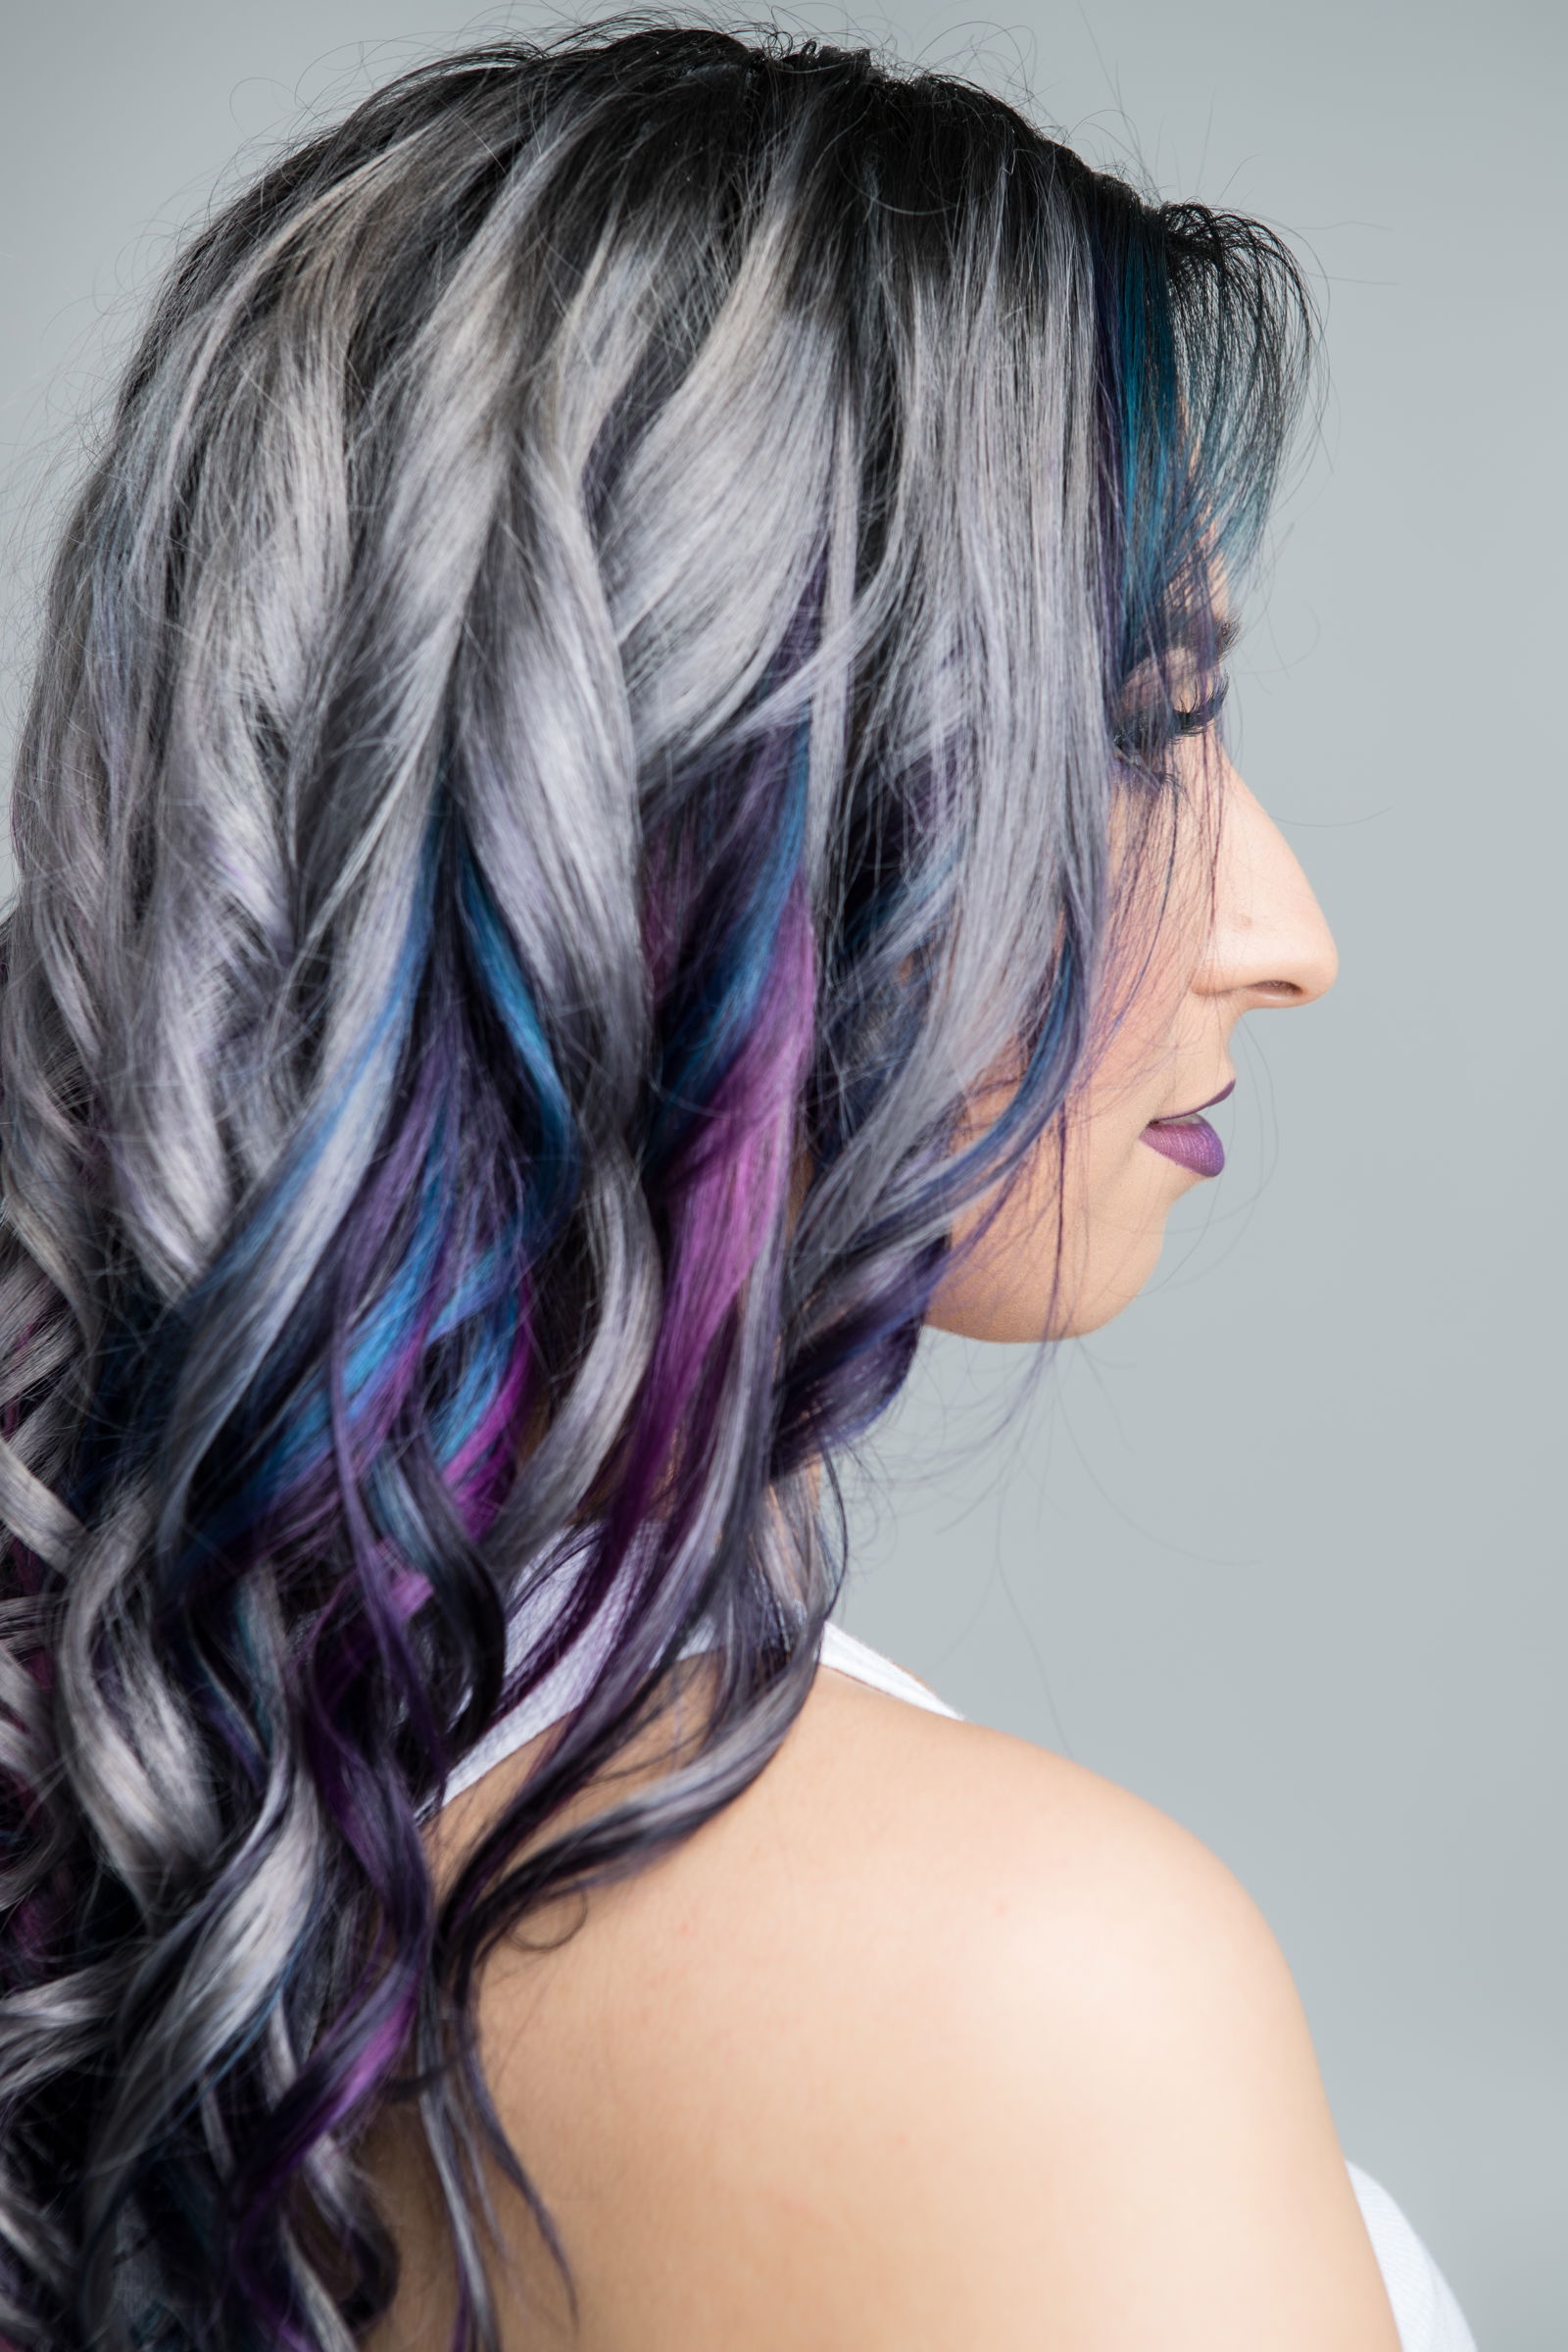 Side view of a long hair style. Hair is mostly silver with blue and purple streaks mixed at the ends.